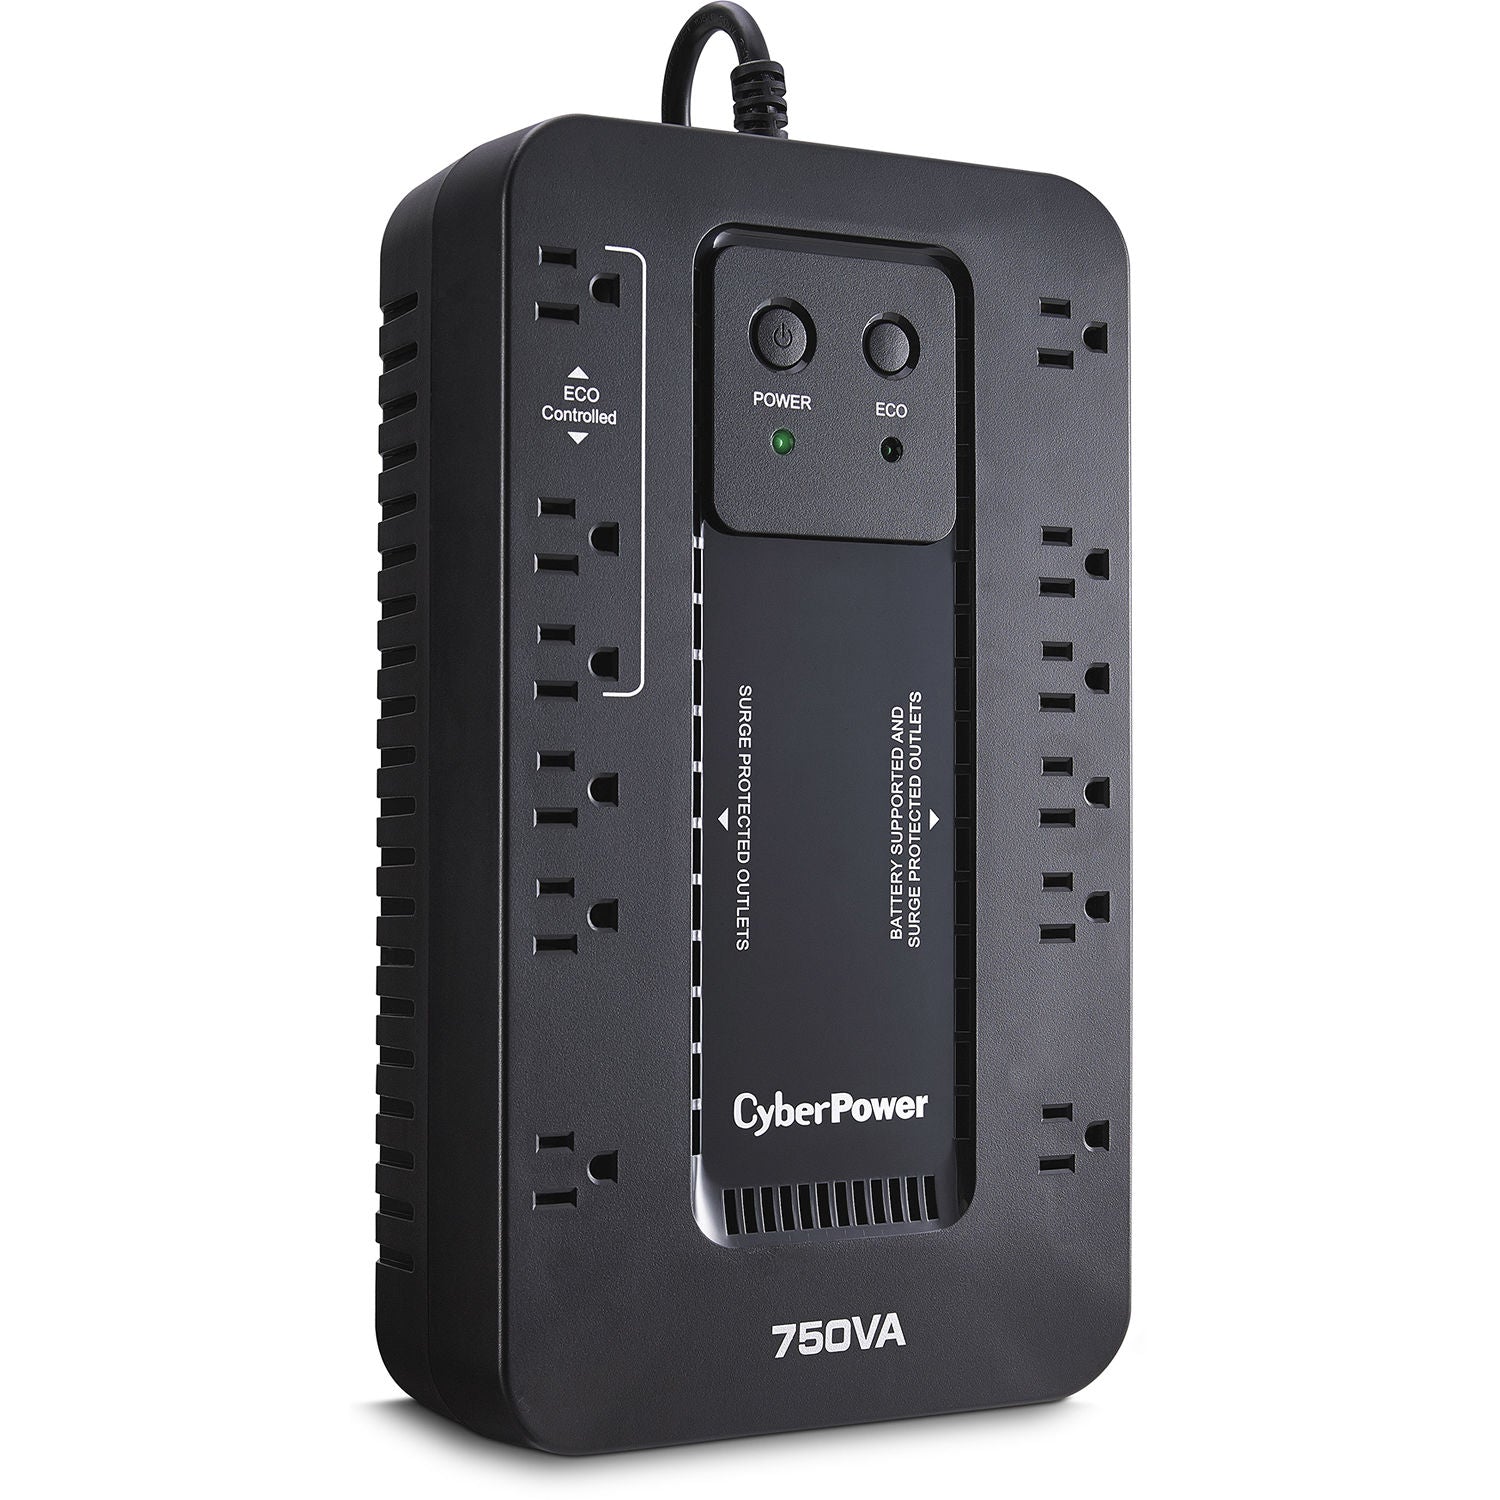 CyberPower EC750G-R 750VA/450W 12 Outlets Ecologic Series Uninterruptible Power Supply - New Battery Certified Refurbished